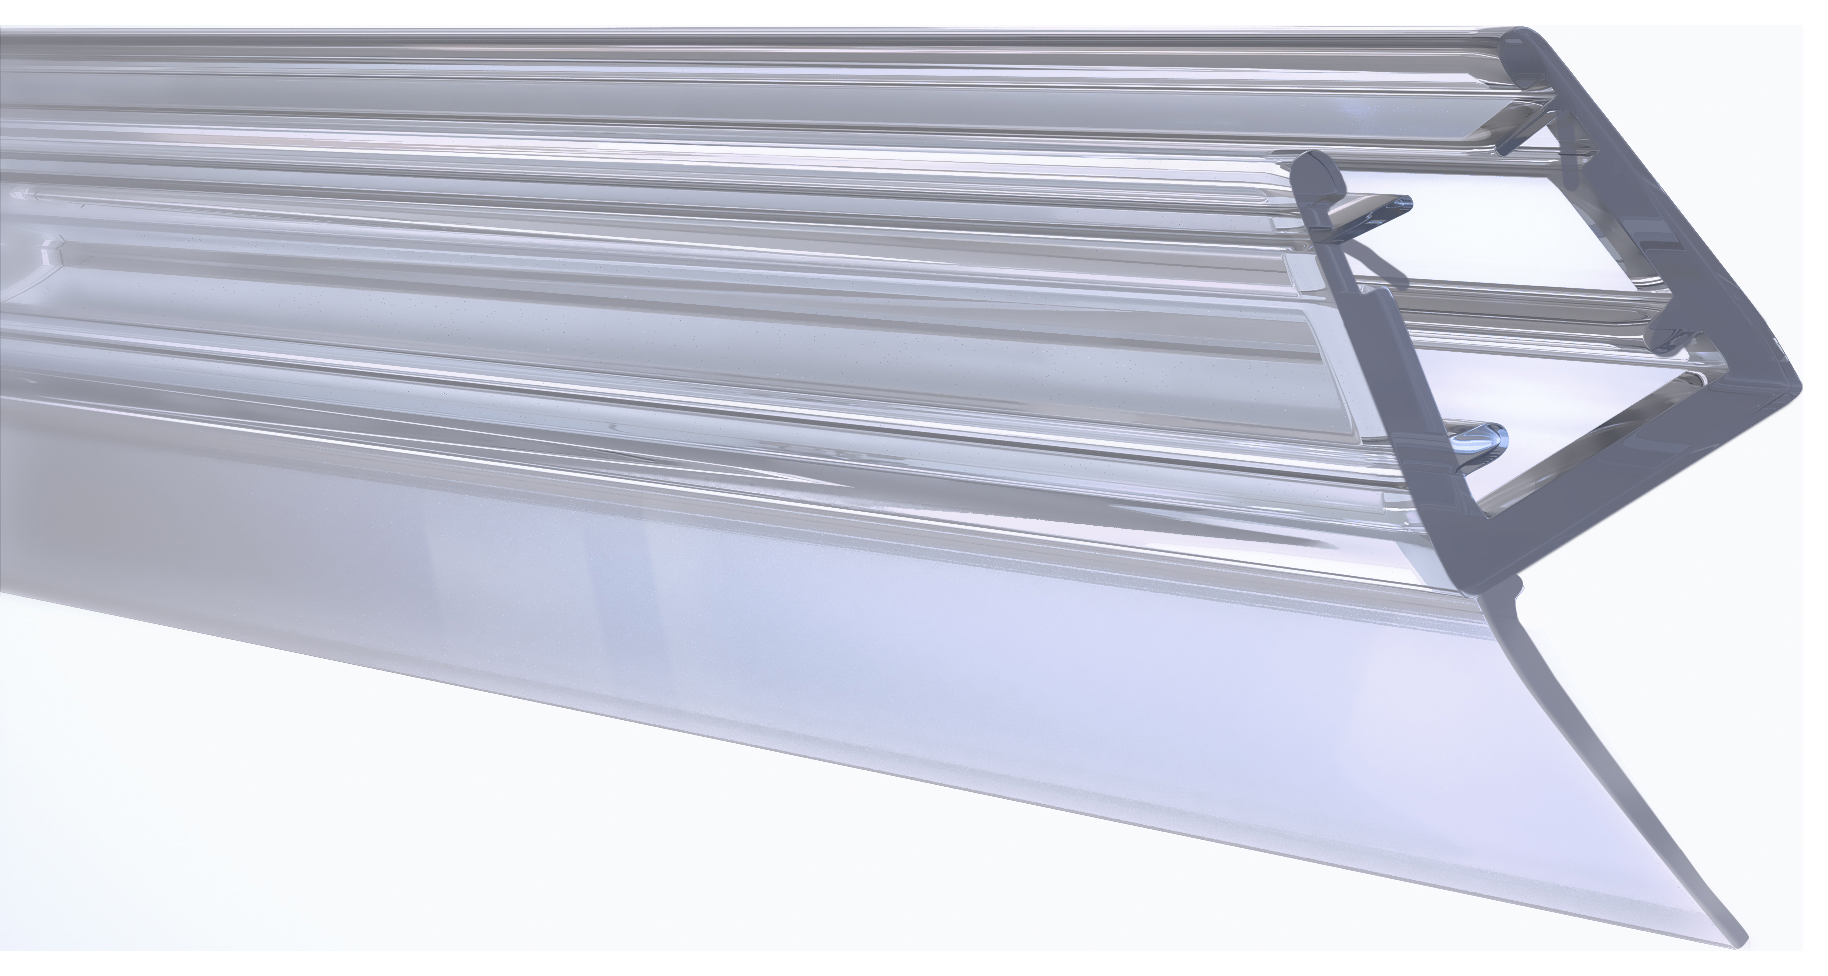 Image of Wickes Shower Screen Side Seal for Pivot Doors - 6 x 2000mm